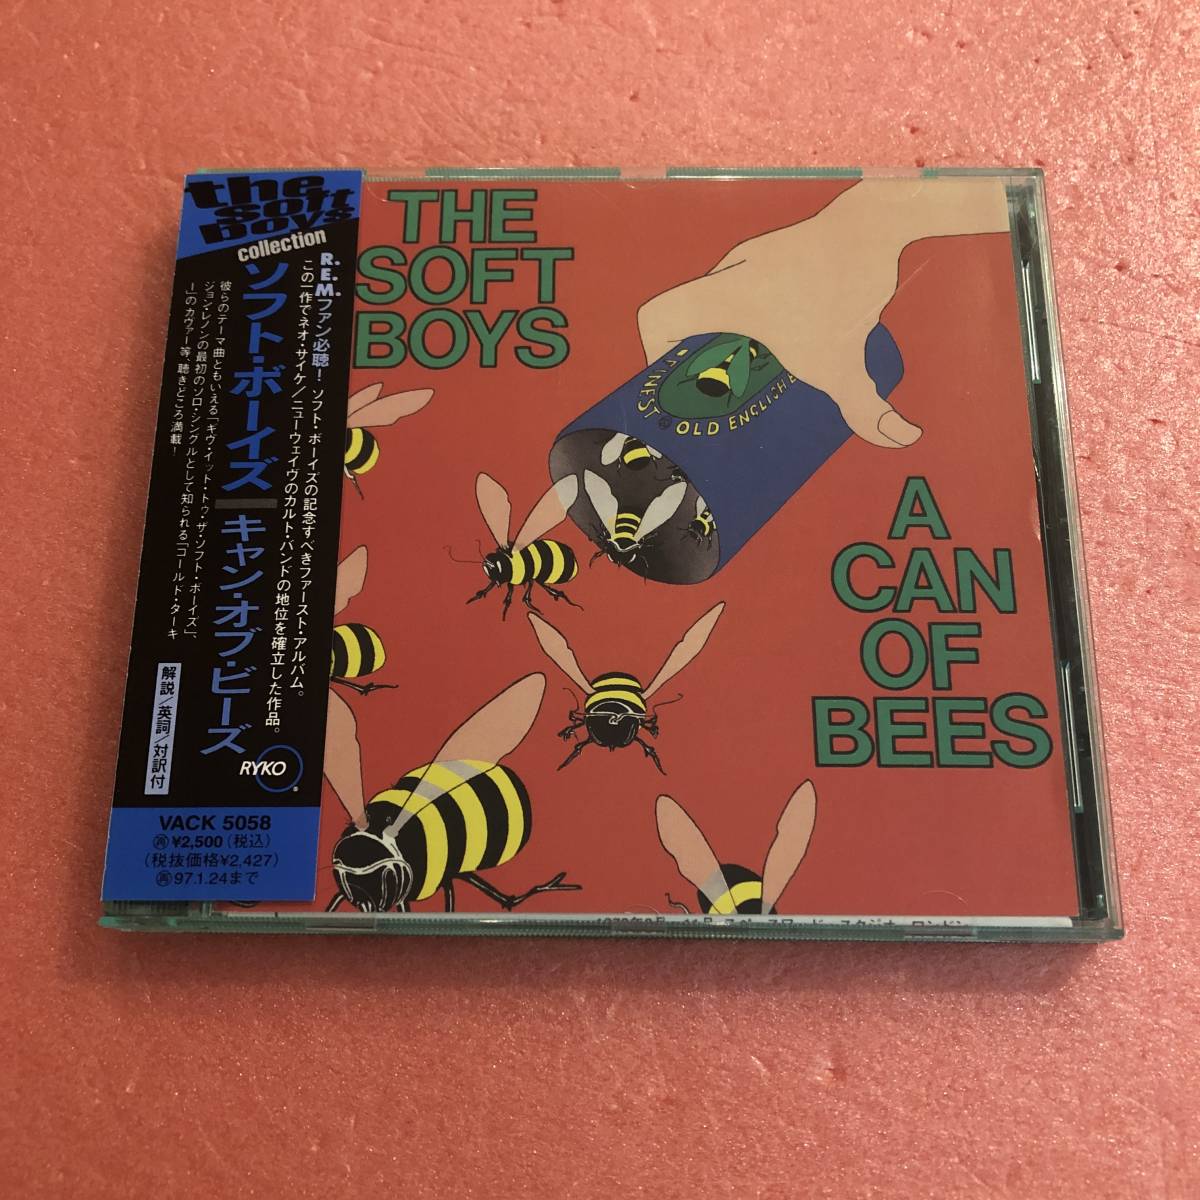 CD 国内盤 帯付 ソフト ボーイズ キャン オブ ビーズ The Soft Boys A Can Of Bees R.E.M. New Wave_画像1